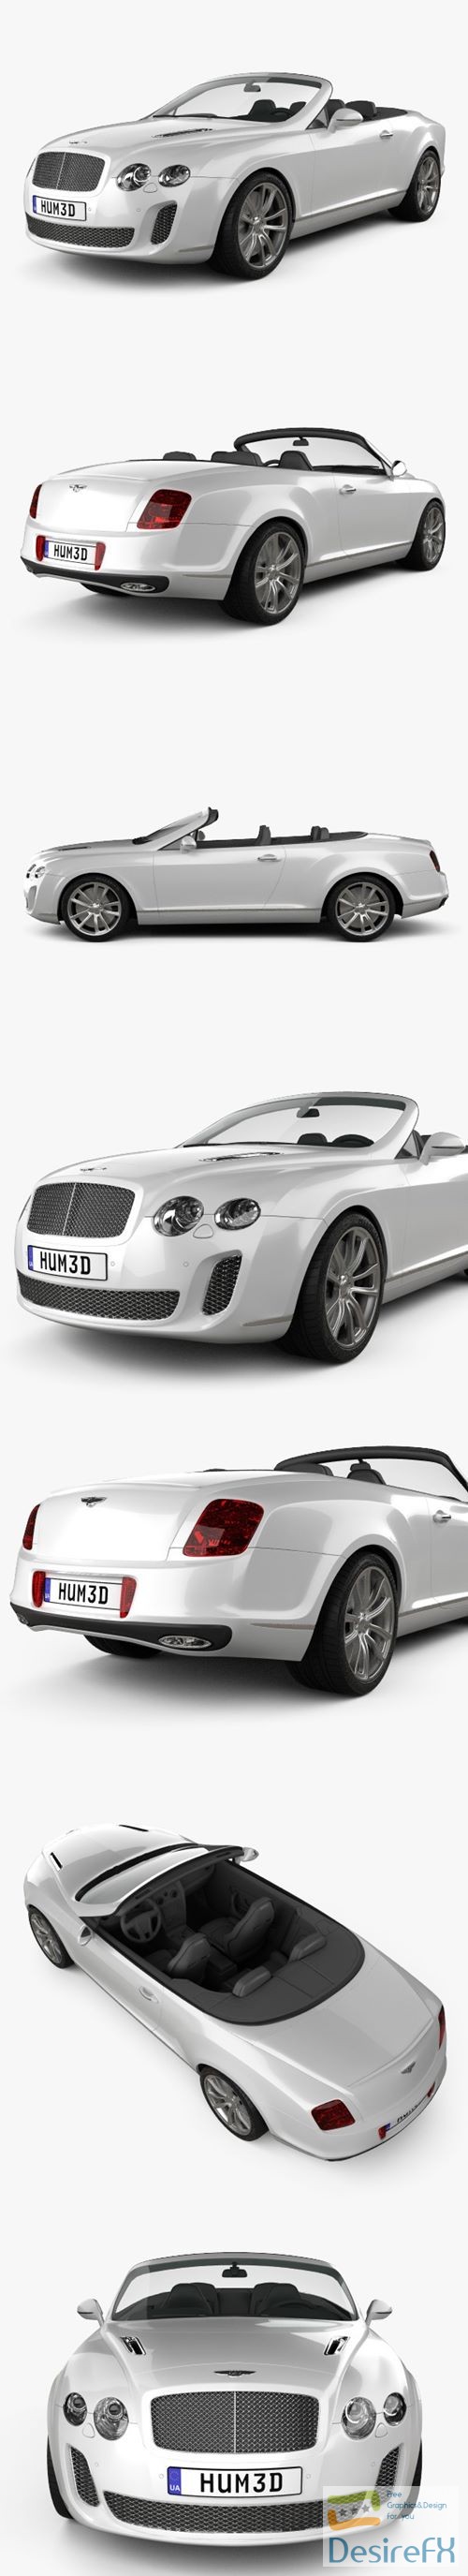 Bentley Continental Supersports convertible 2010 3D Model